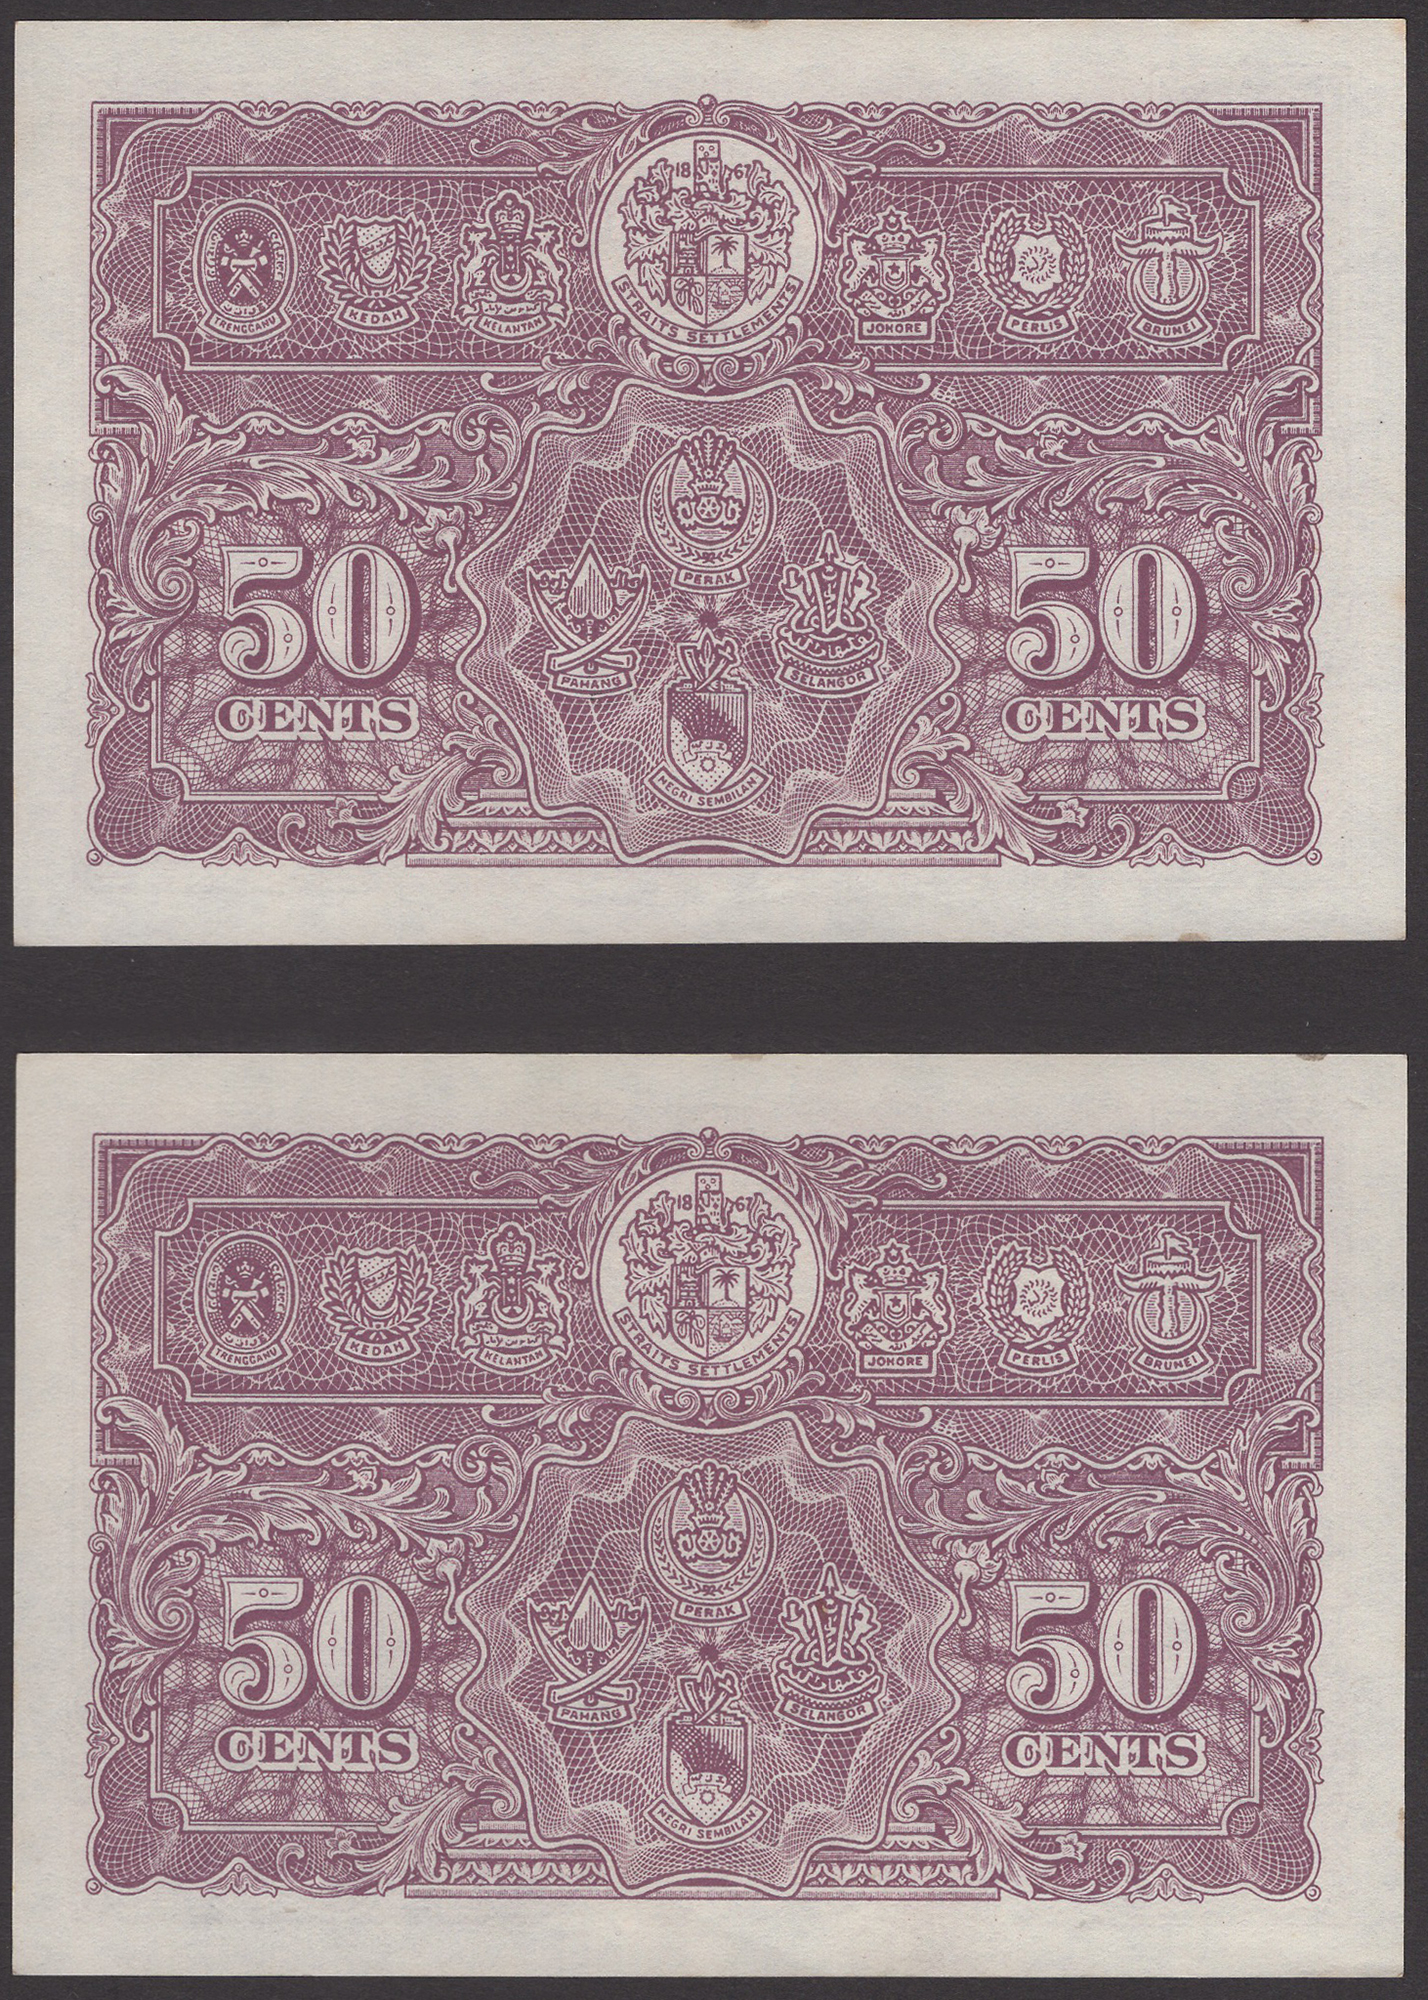 Board of Commissioners of Currency Malaya, 50 Cents (2), 1 July 1941, serial numbers A/25... - Image 2 of 2